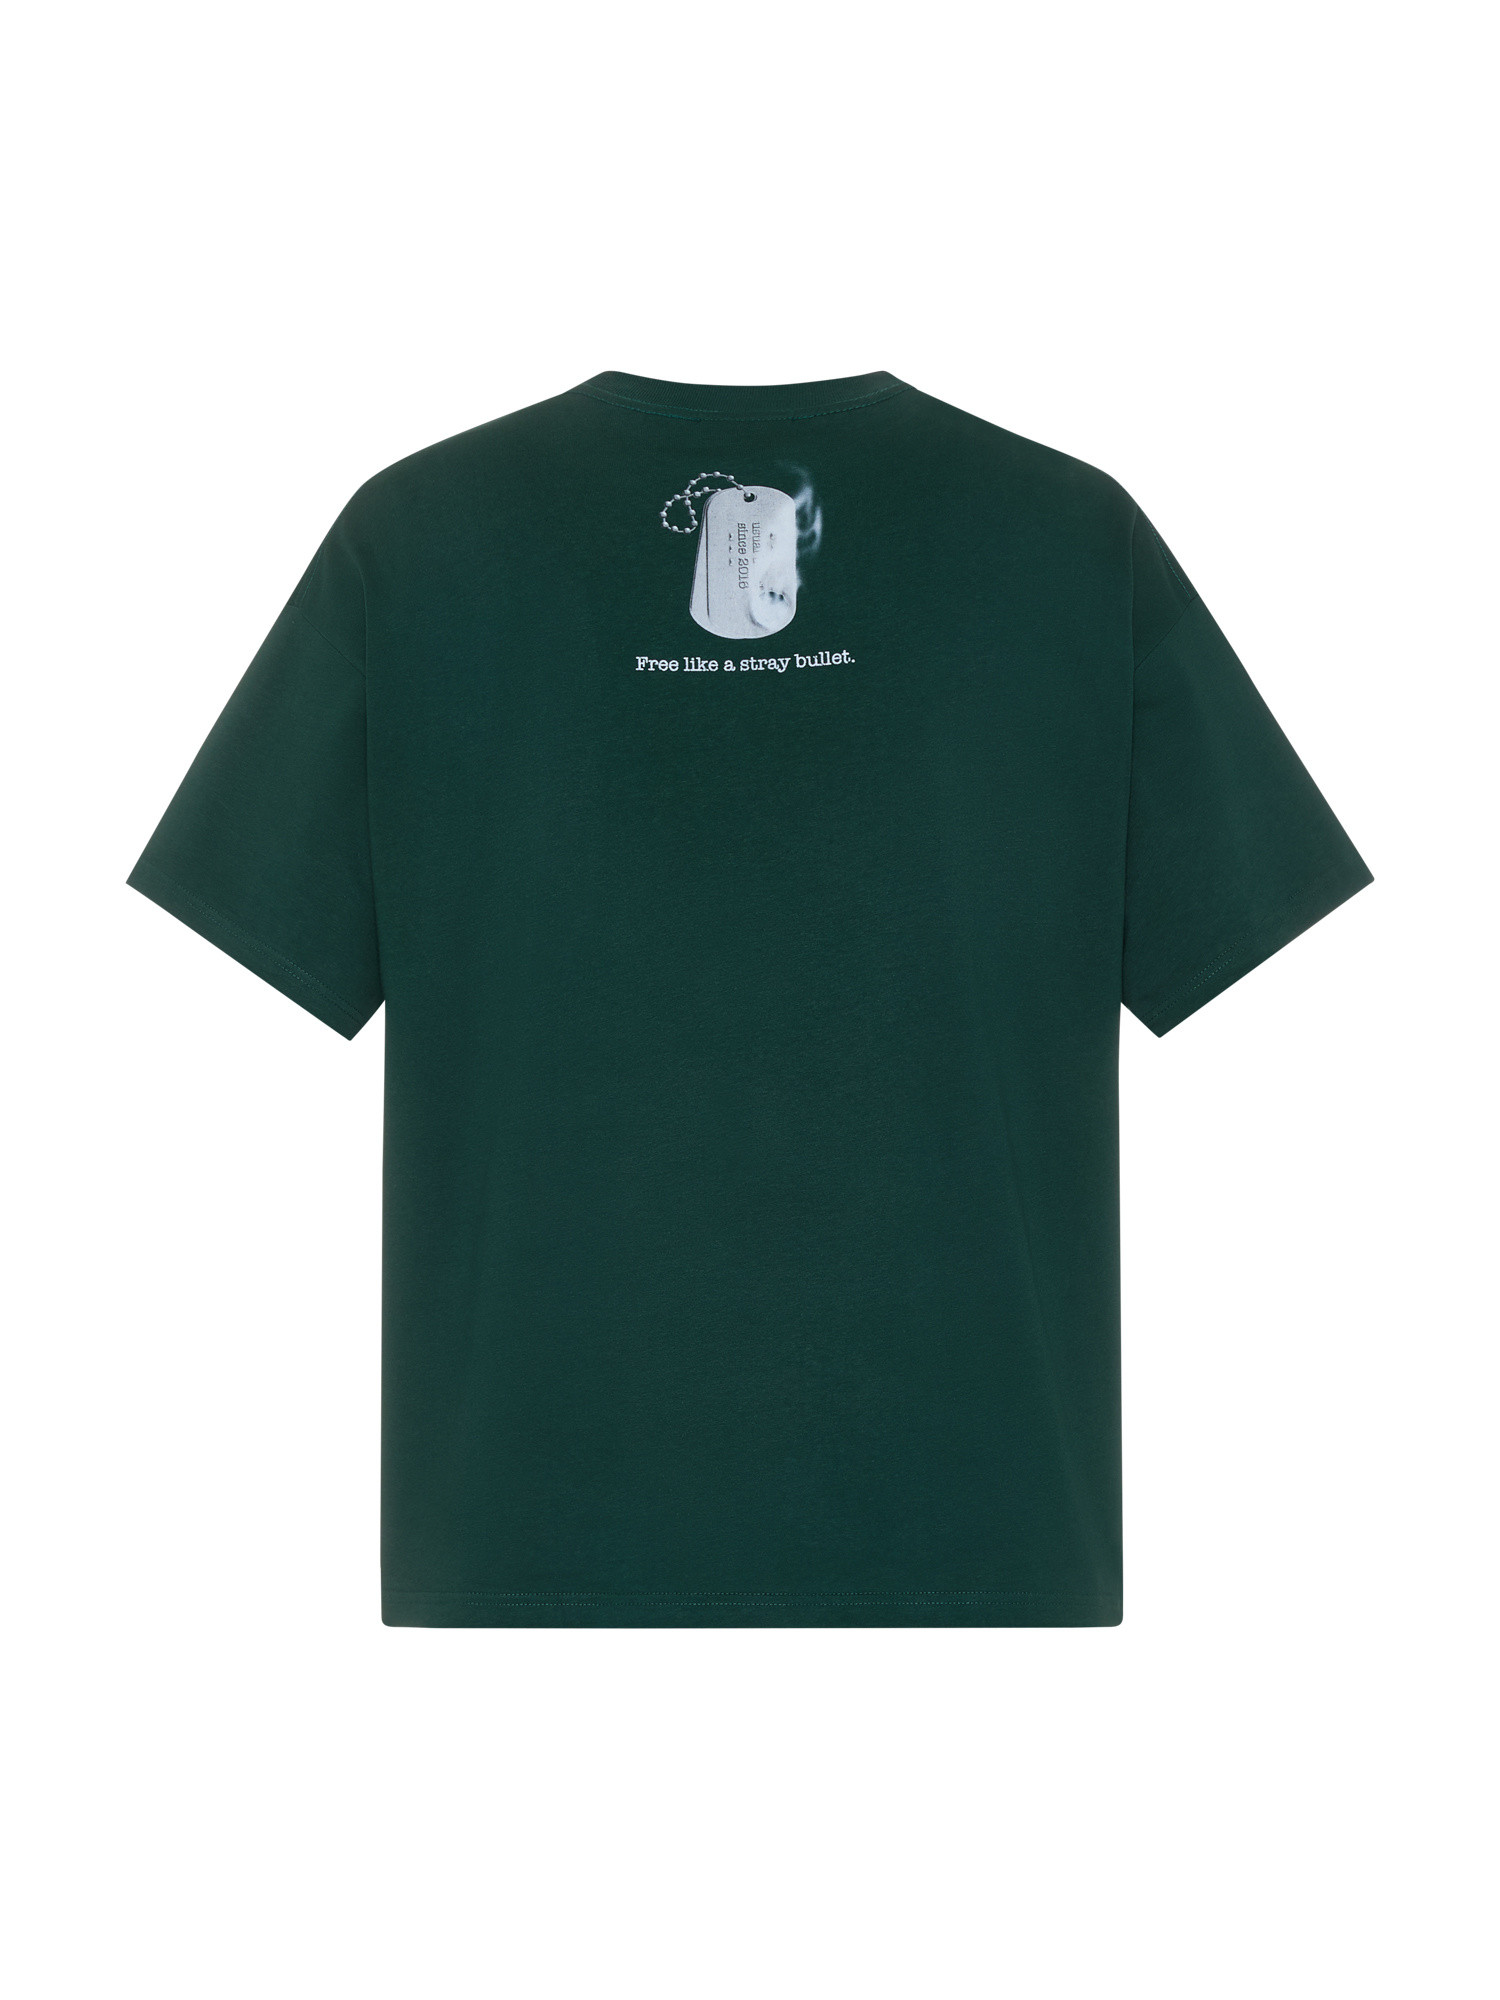 Usual - Bullet T-Shirt, Green, large image number 1